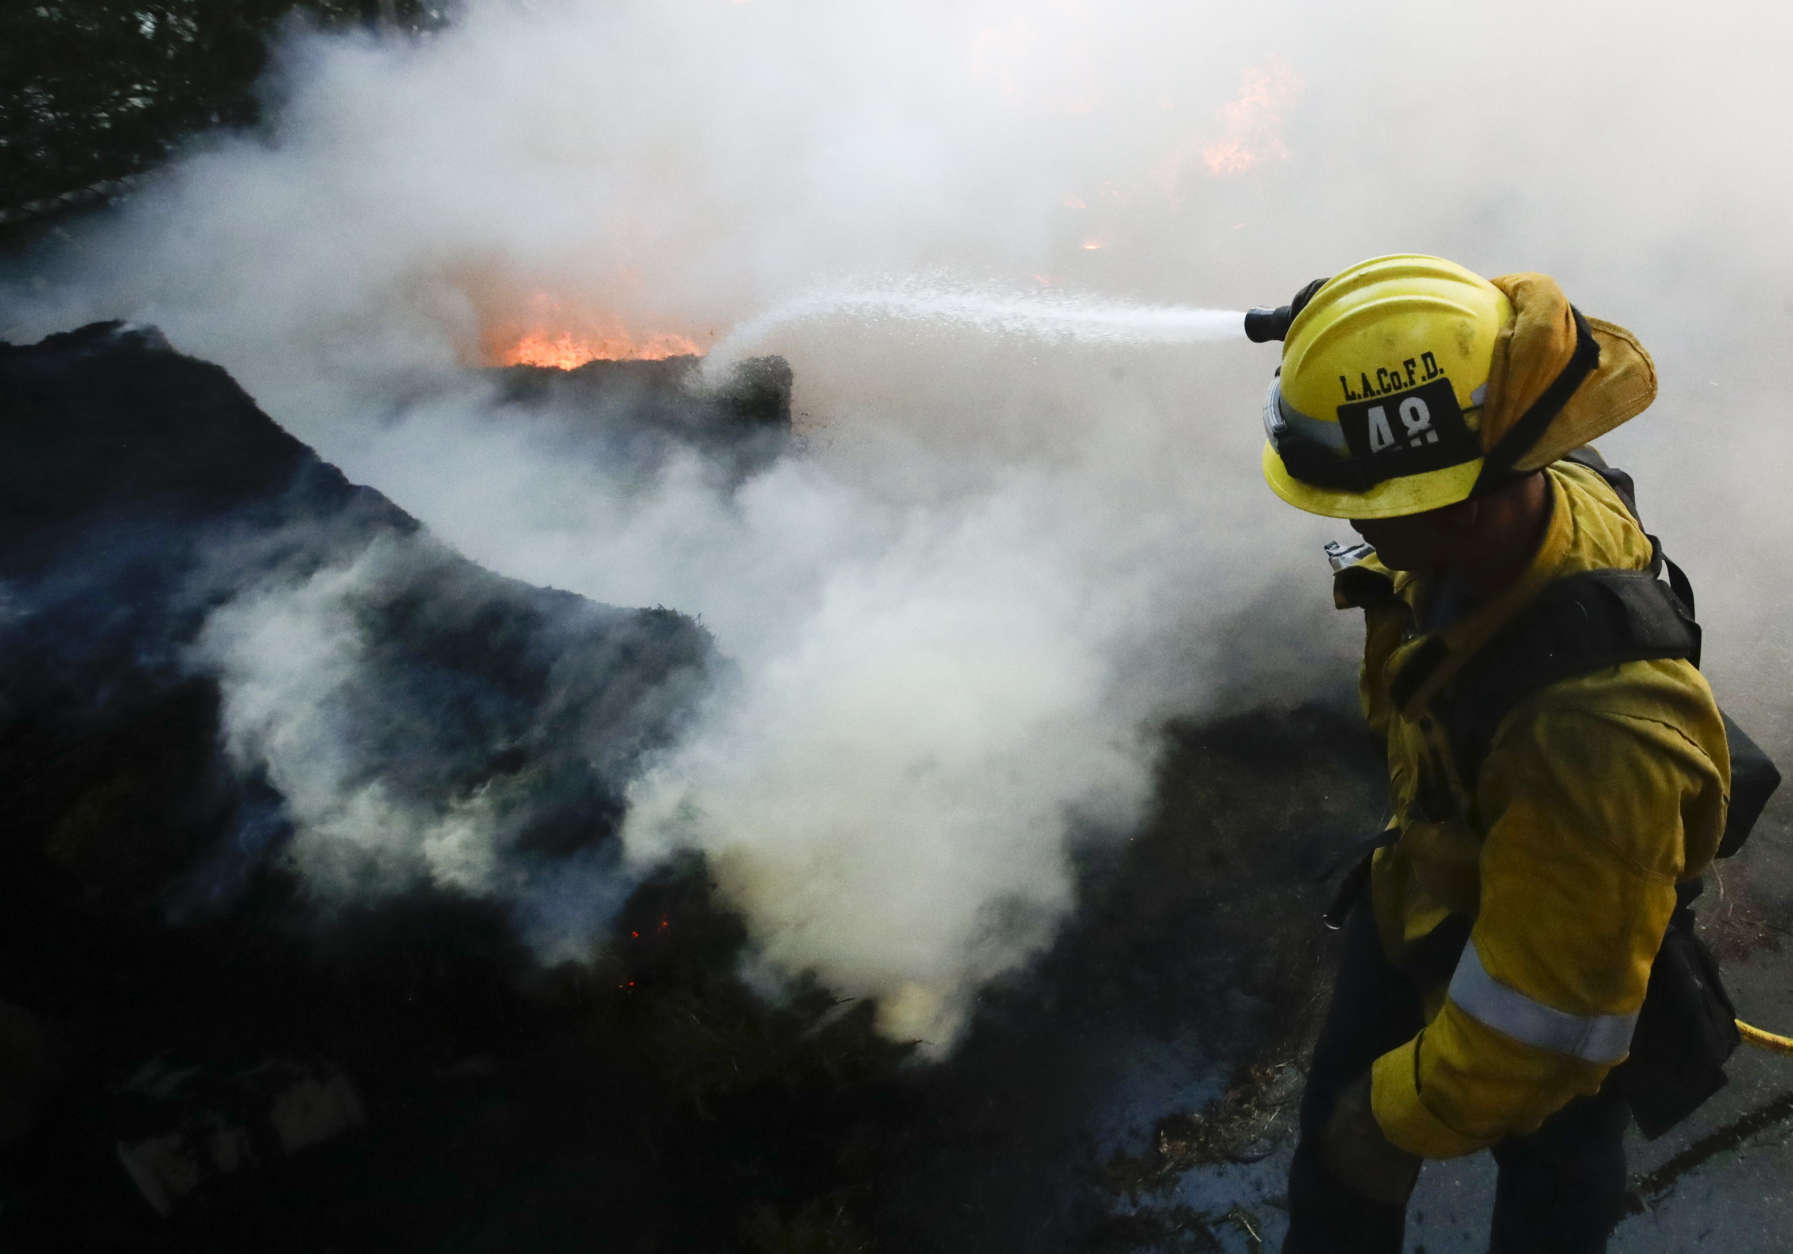 A Los Angeles County firefighter puts water on a burning car during the Creek Fire in the Lake View Terrace area of Los Angeles Tuesday, Dec. 5, 2017. (AP Photo/Chris Carlson)